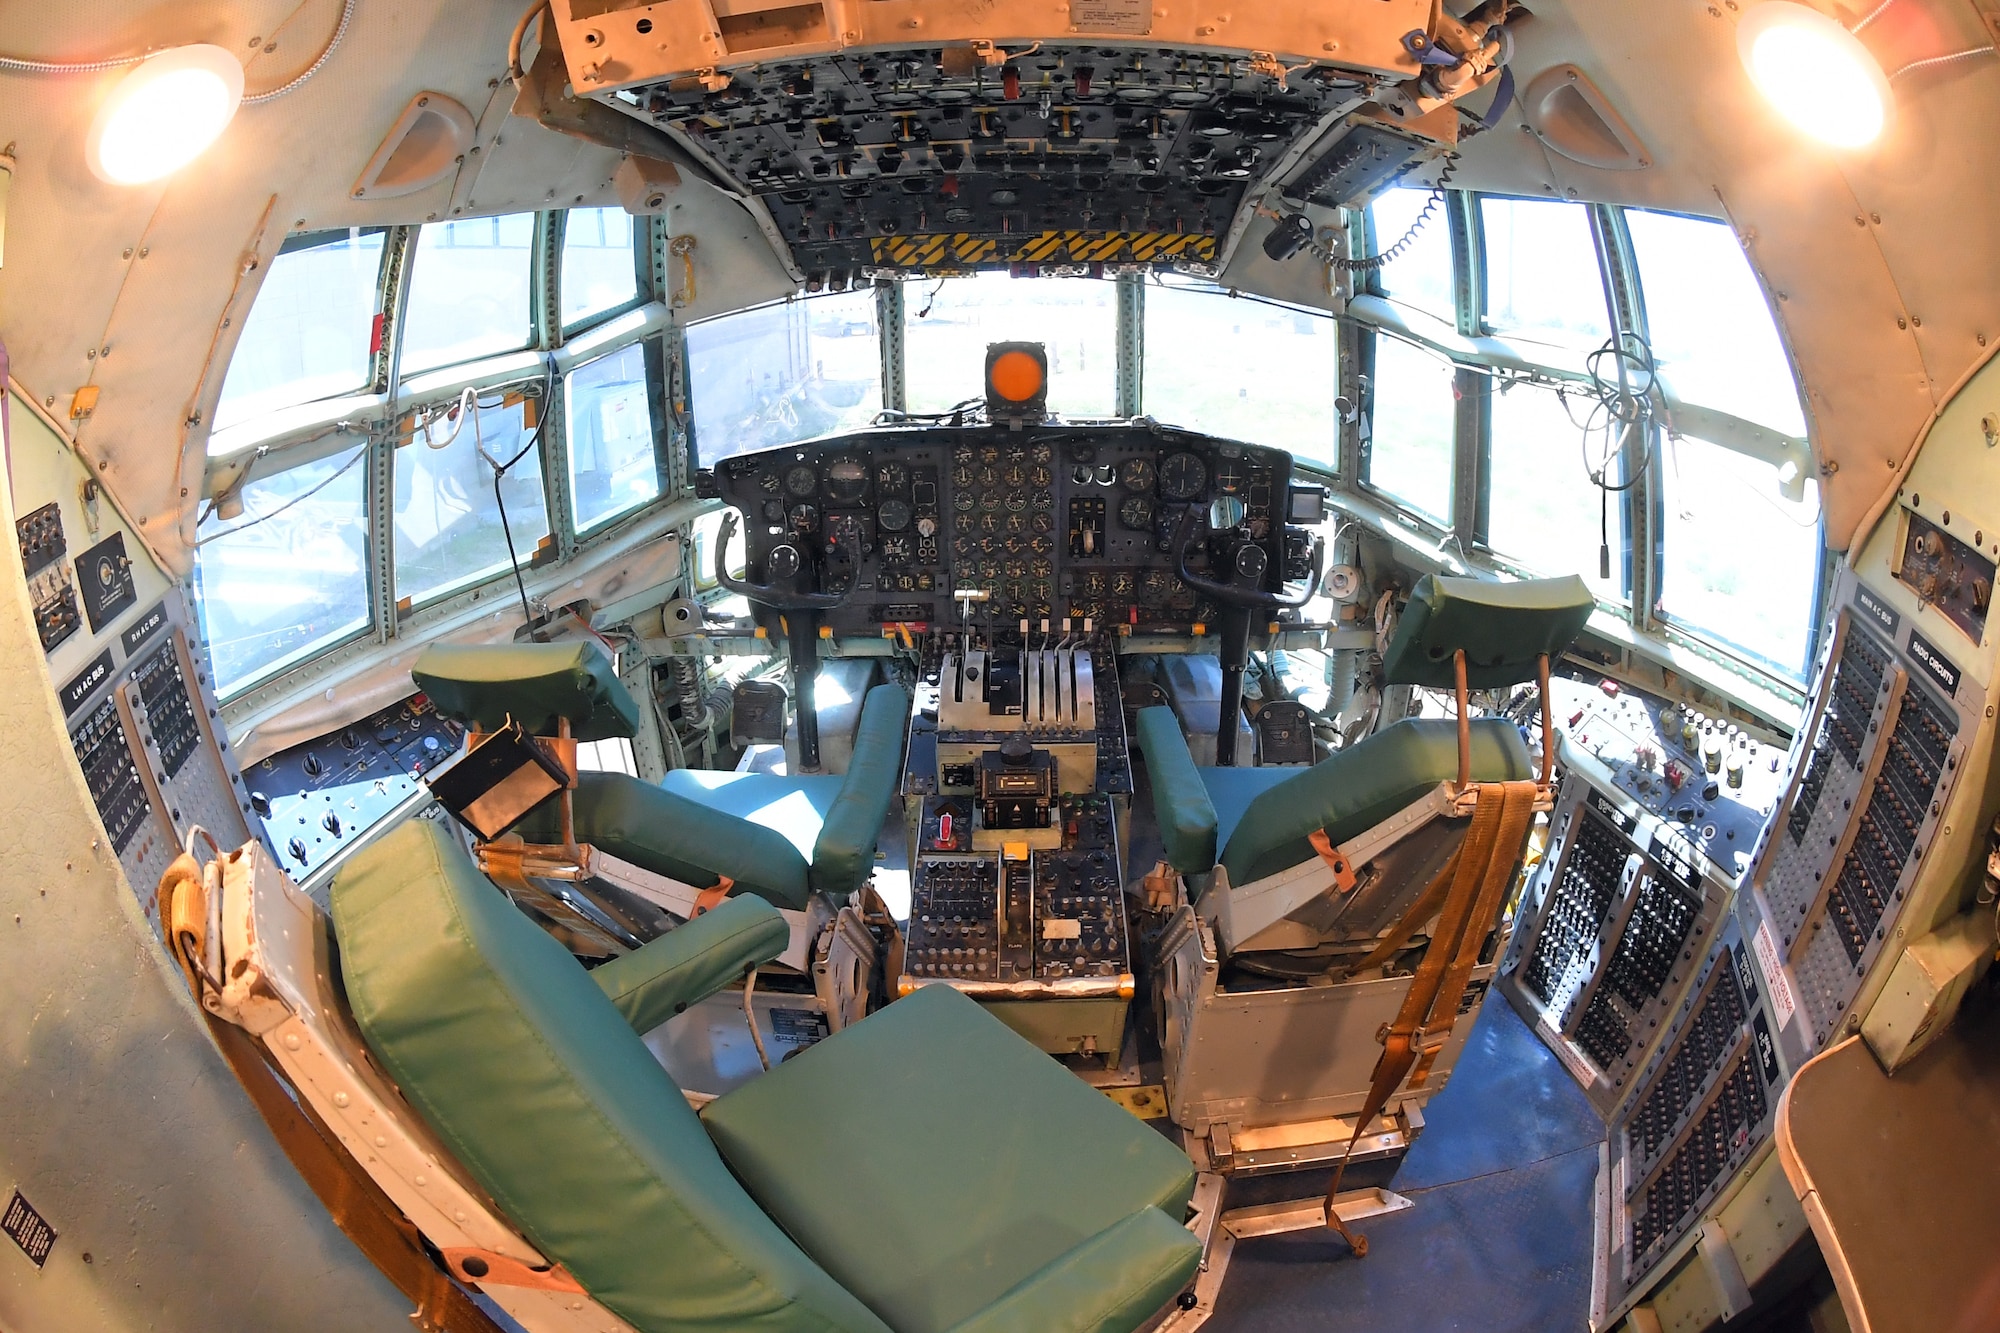 The cockpit of “The C-130 Experience” located inside the Hill Aerospace Museum May 14, 2019, at Hill Air Force Base Utah. The museum worked with base and community partners for several years to convert the C-130 aircraft fuselage into an interactive classroom. Visitors can now sit in the pilot’s seat, push buttons, flip switches and turn the dials. The complete experience will include all of the sights, sounds and smells of a real C-130 mission. (U.S. Air Force photo by Todd Cromar)